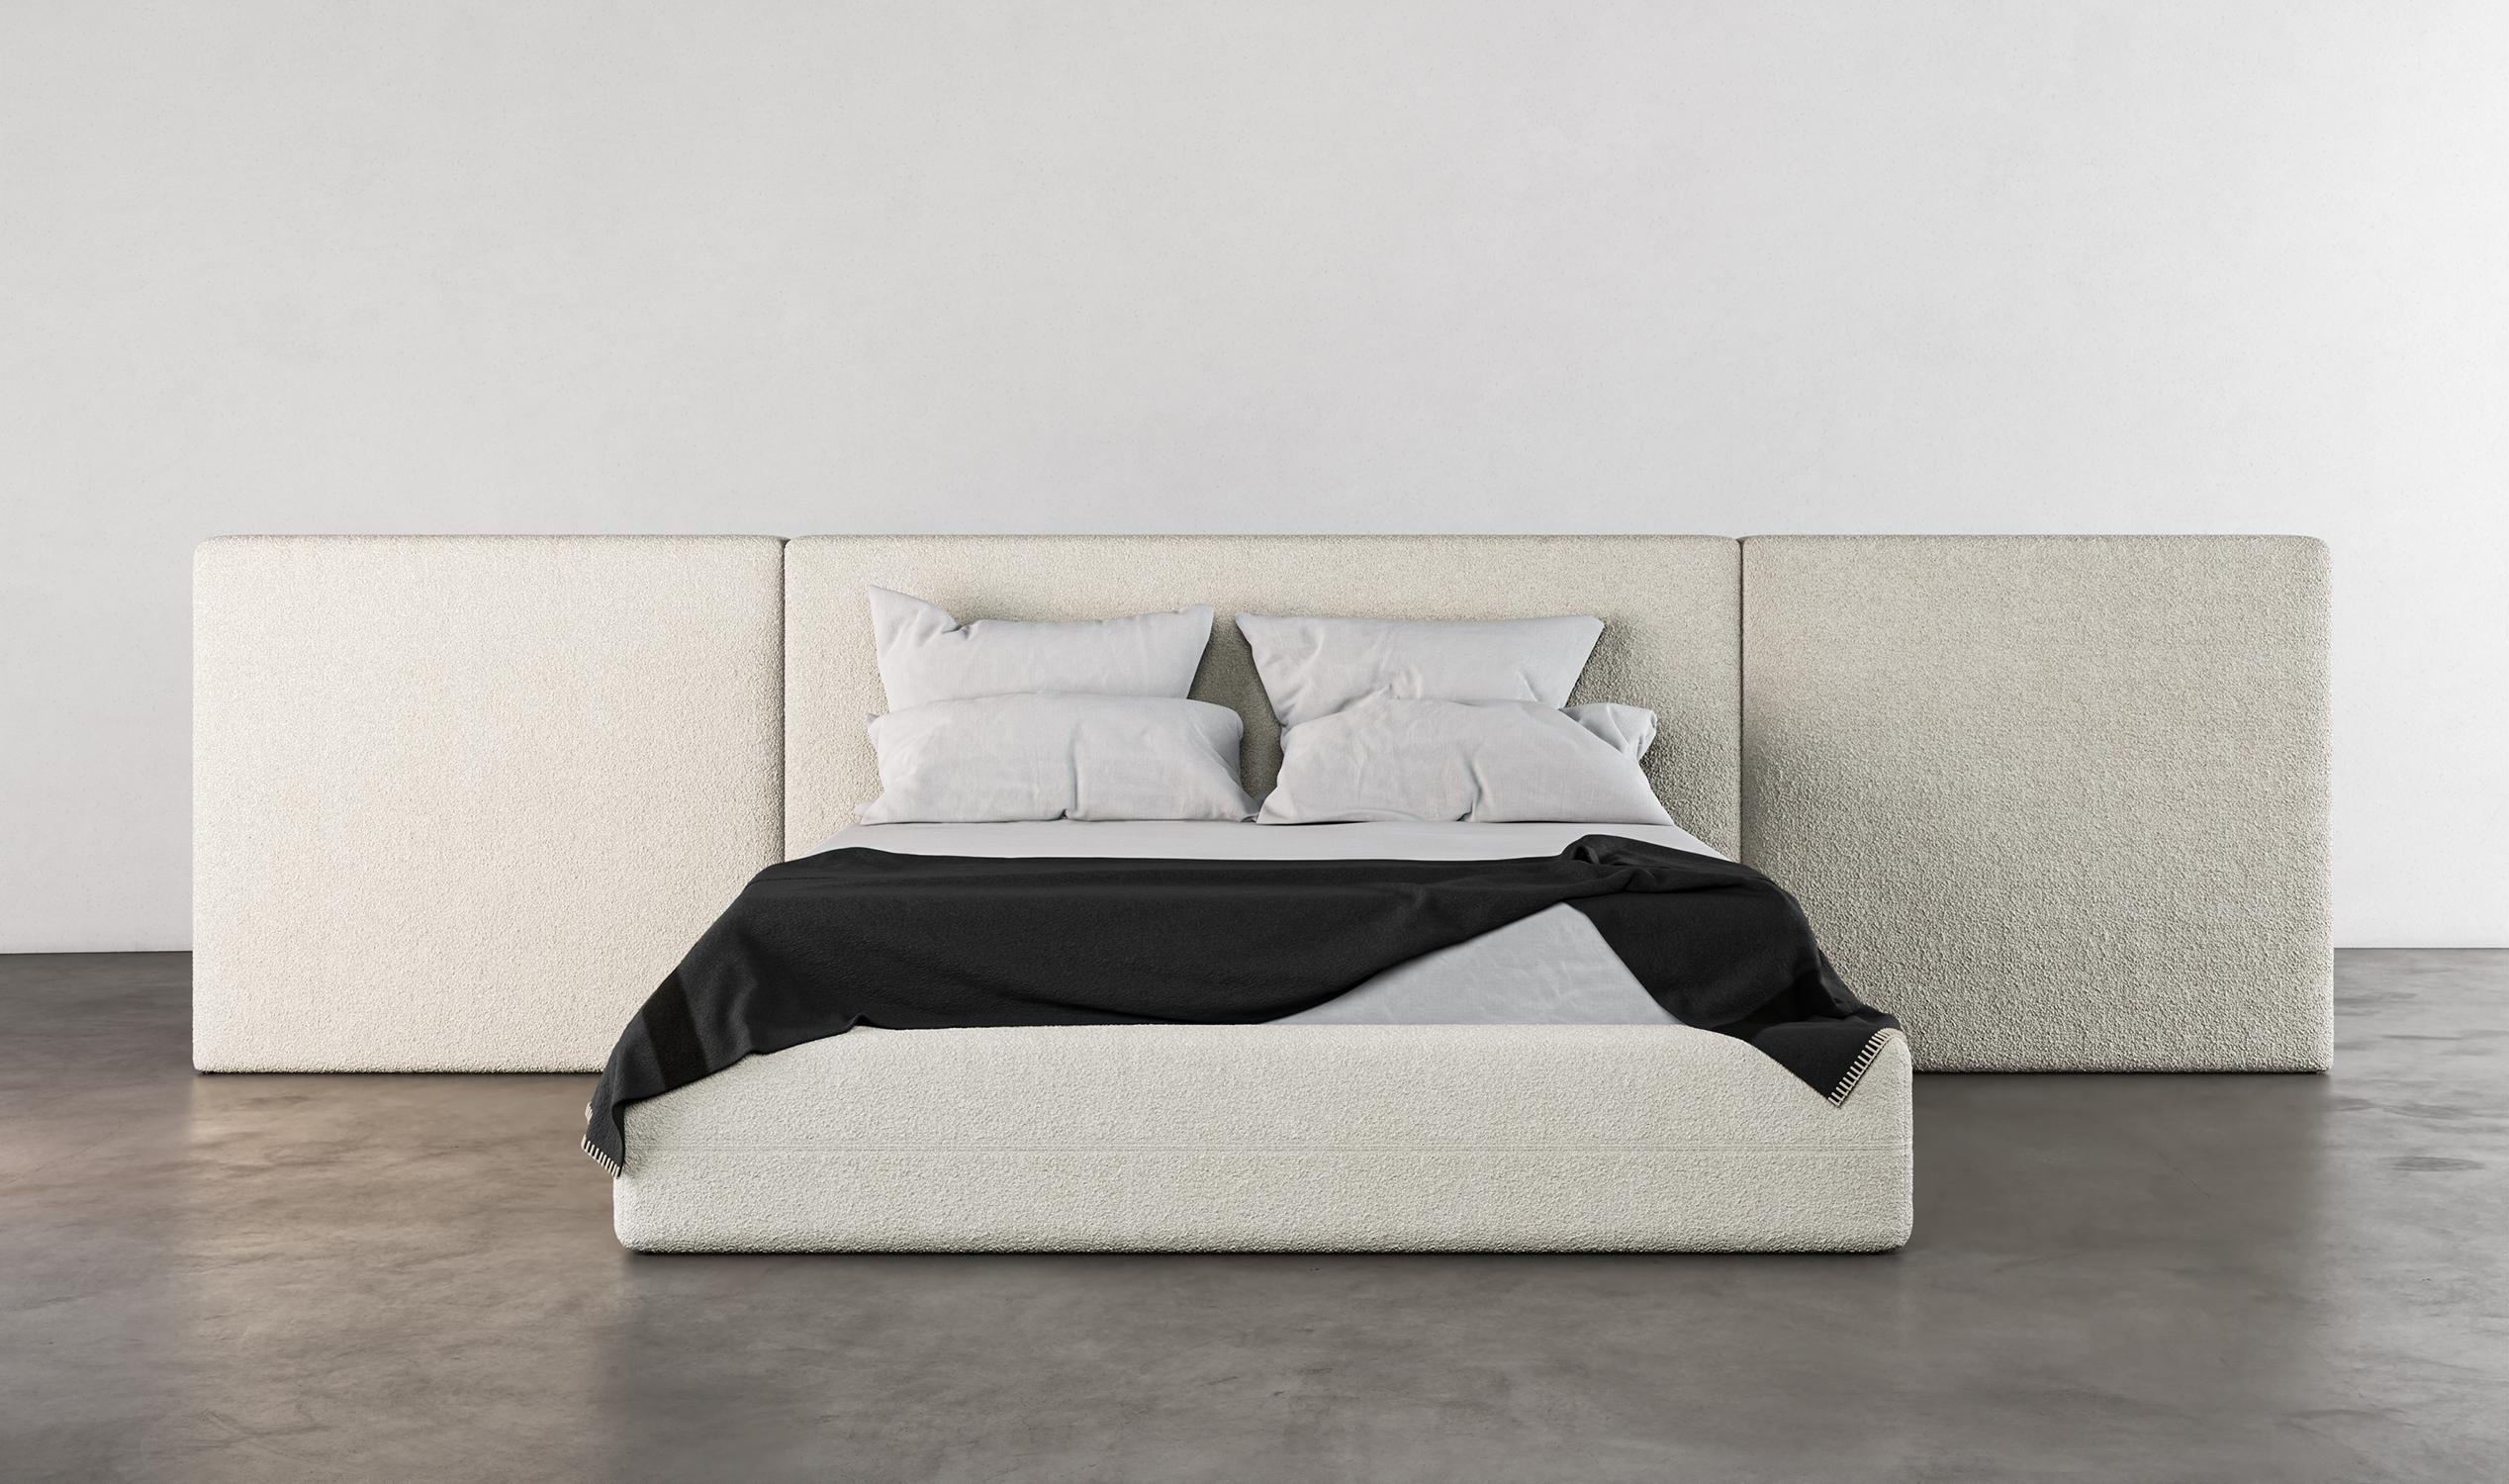 Our modern Drift Bed is the perfect addition to any contemporary bedroom.

Crafted from high-quality materials, this bed is not only stylish but also durable and long-lasting. The sleek and functional design features clean lines creating a chic and